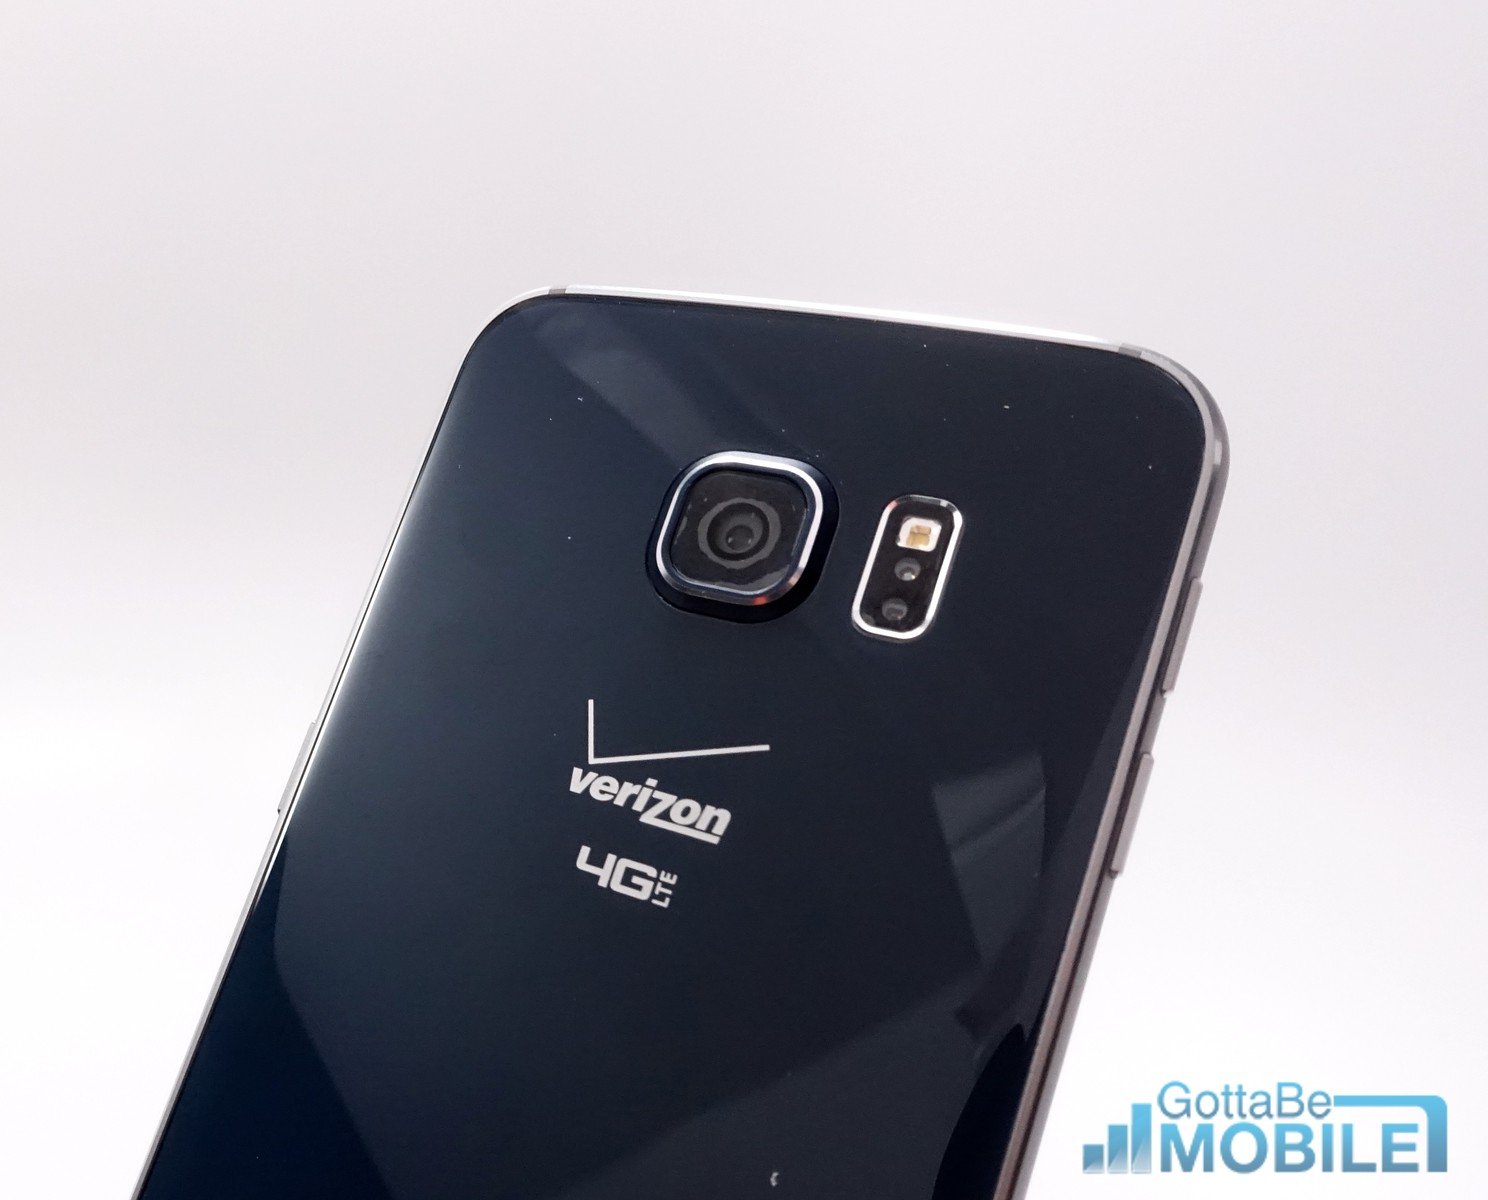 Learn how to fix some Galaxy S6 Edge problems.